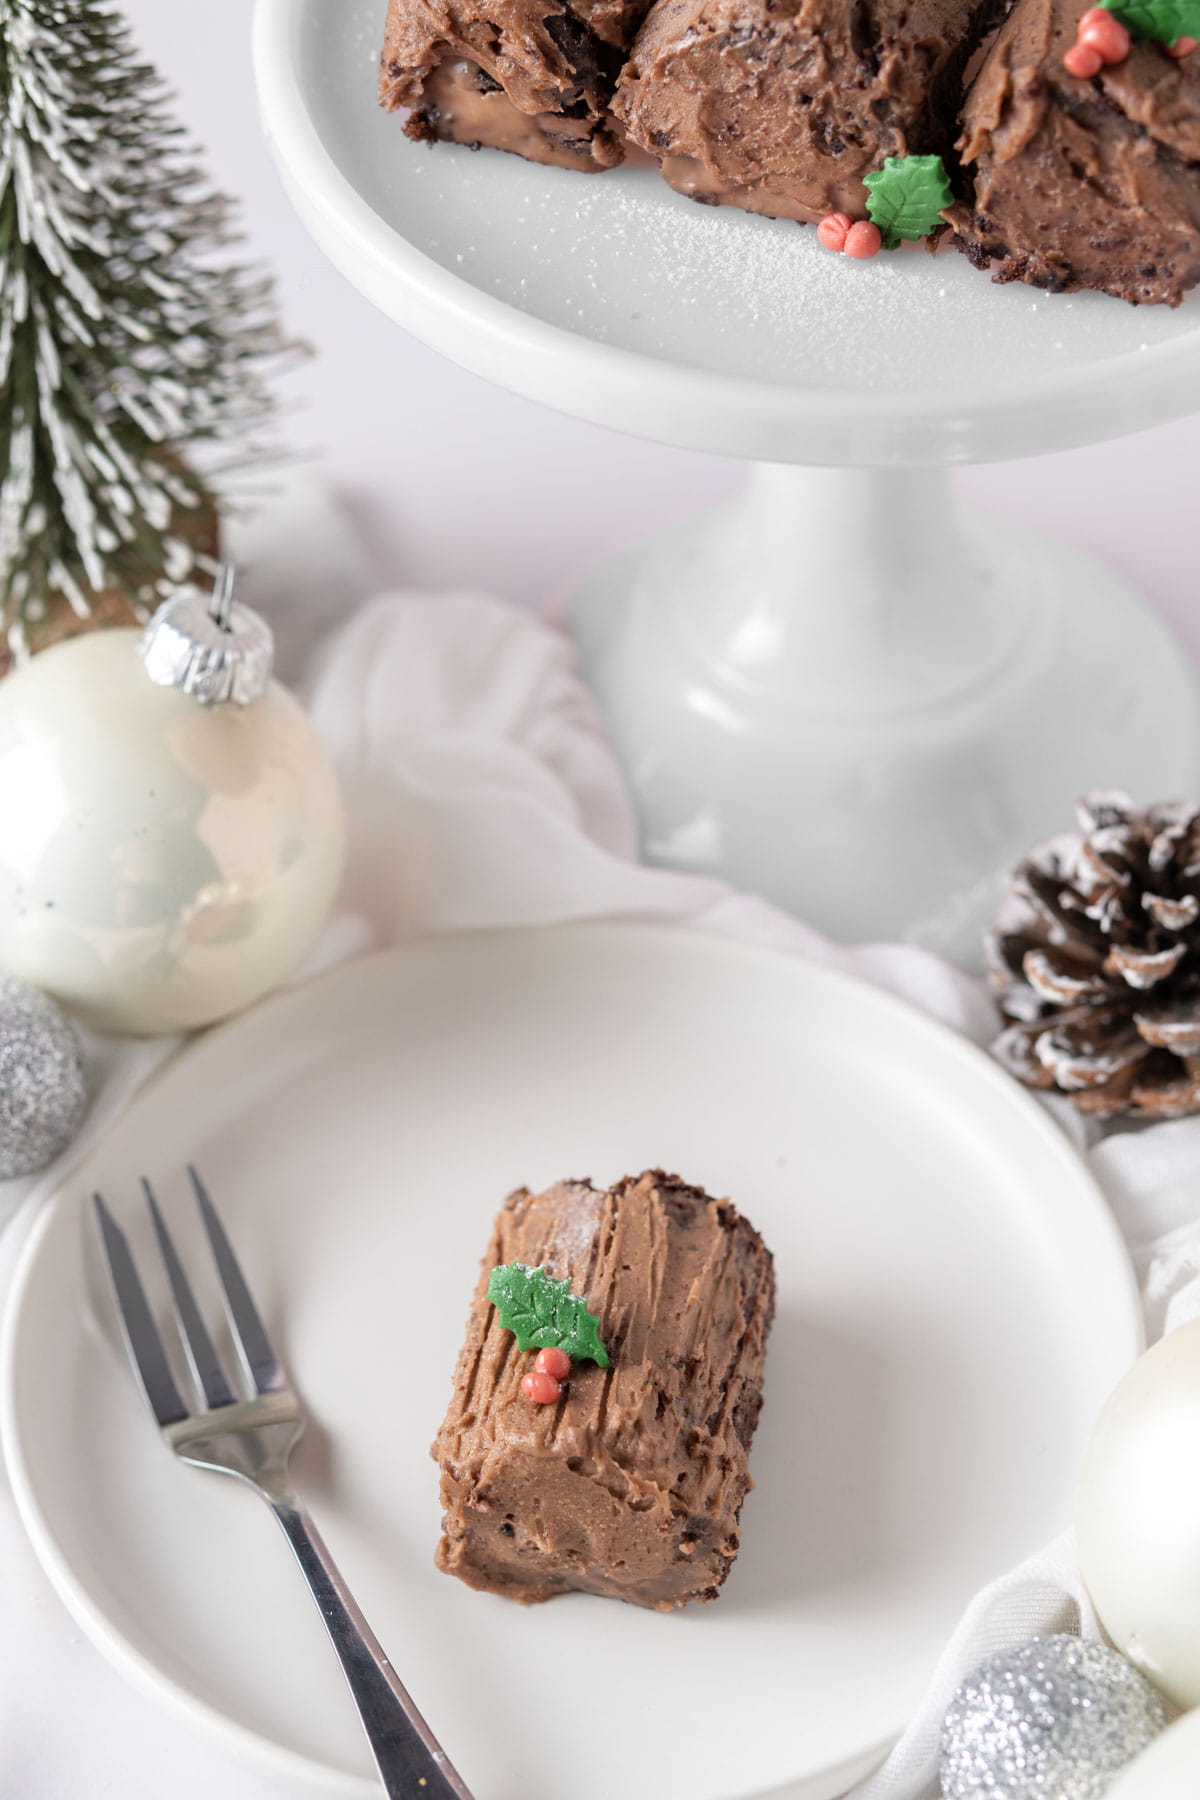 Mini chocolate yule log on a plate with a fork next to a pine cone and silver bauble